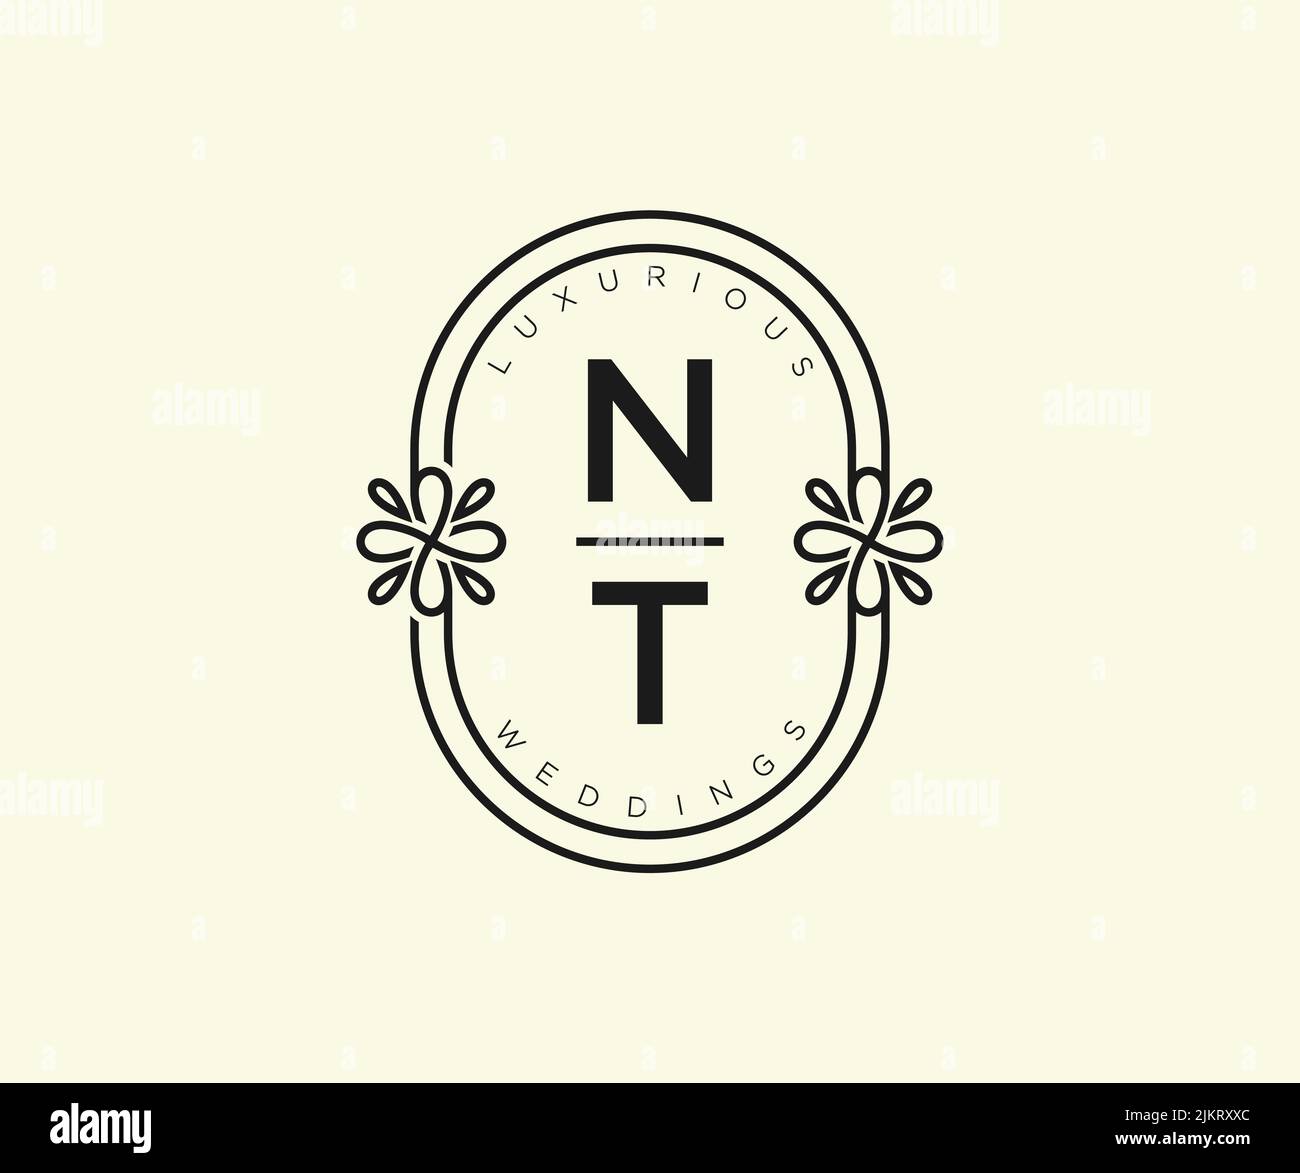 NT Initials letter Wedding monogram logos template, hand drawn modern minimalistic and floral templates for Invitation cards, Save the Date, elegant Stock Vector